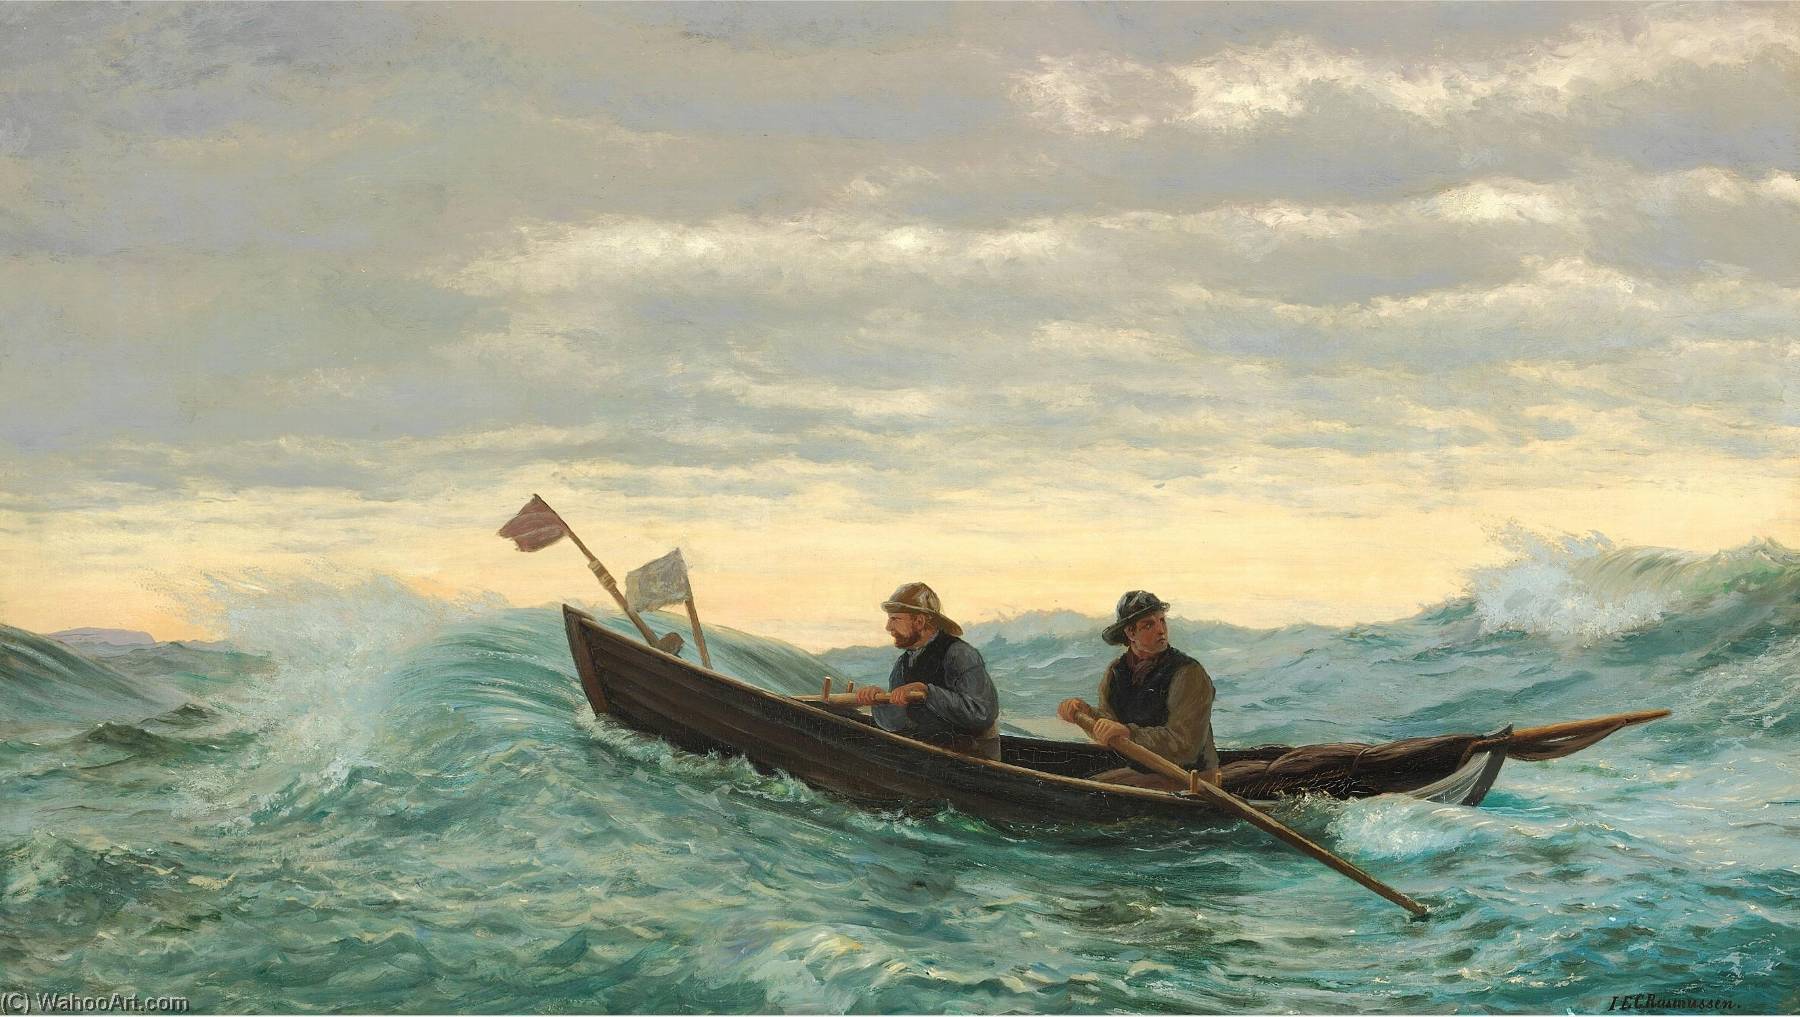 a painting of a father and son in a small wooden boat at sea